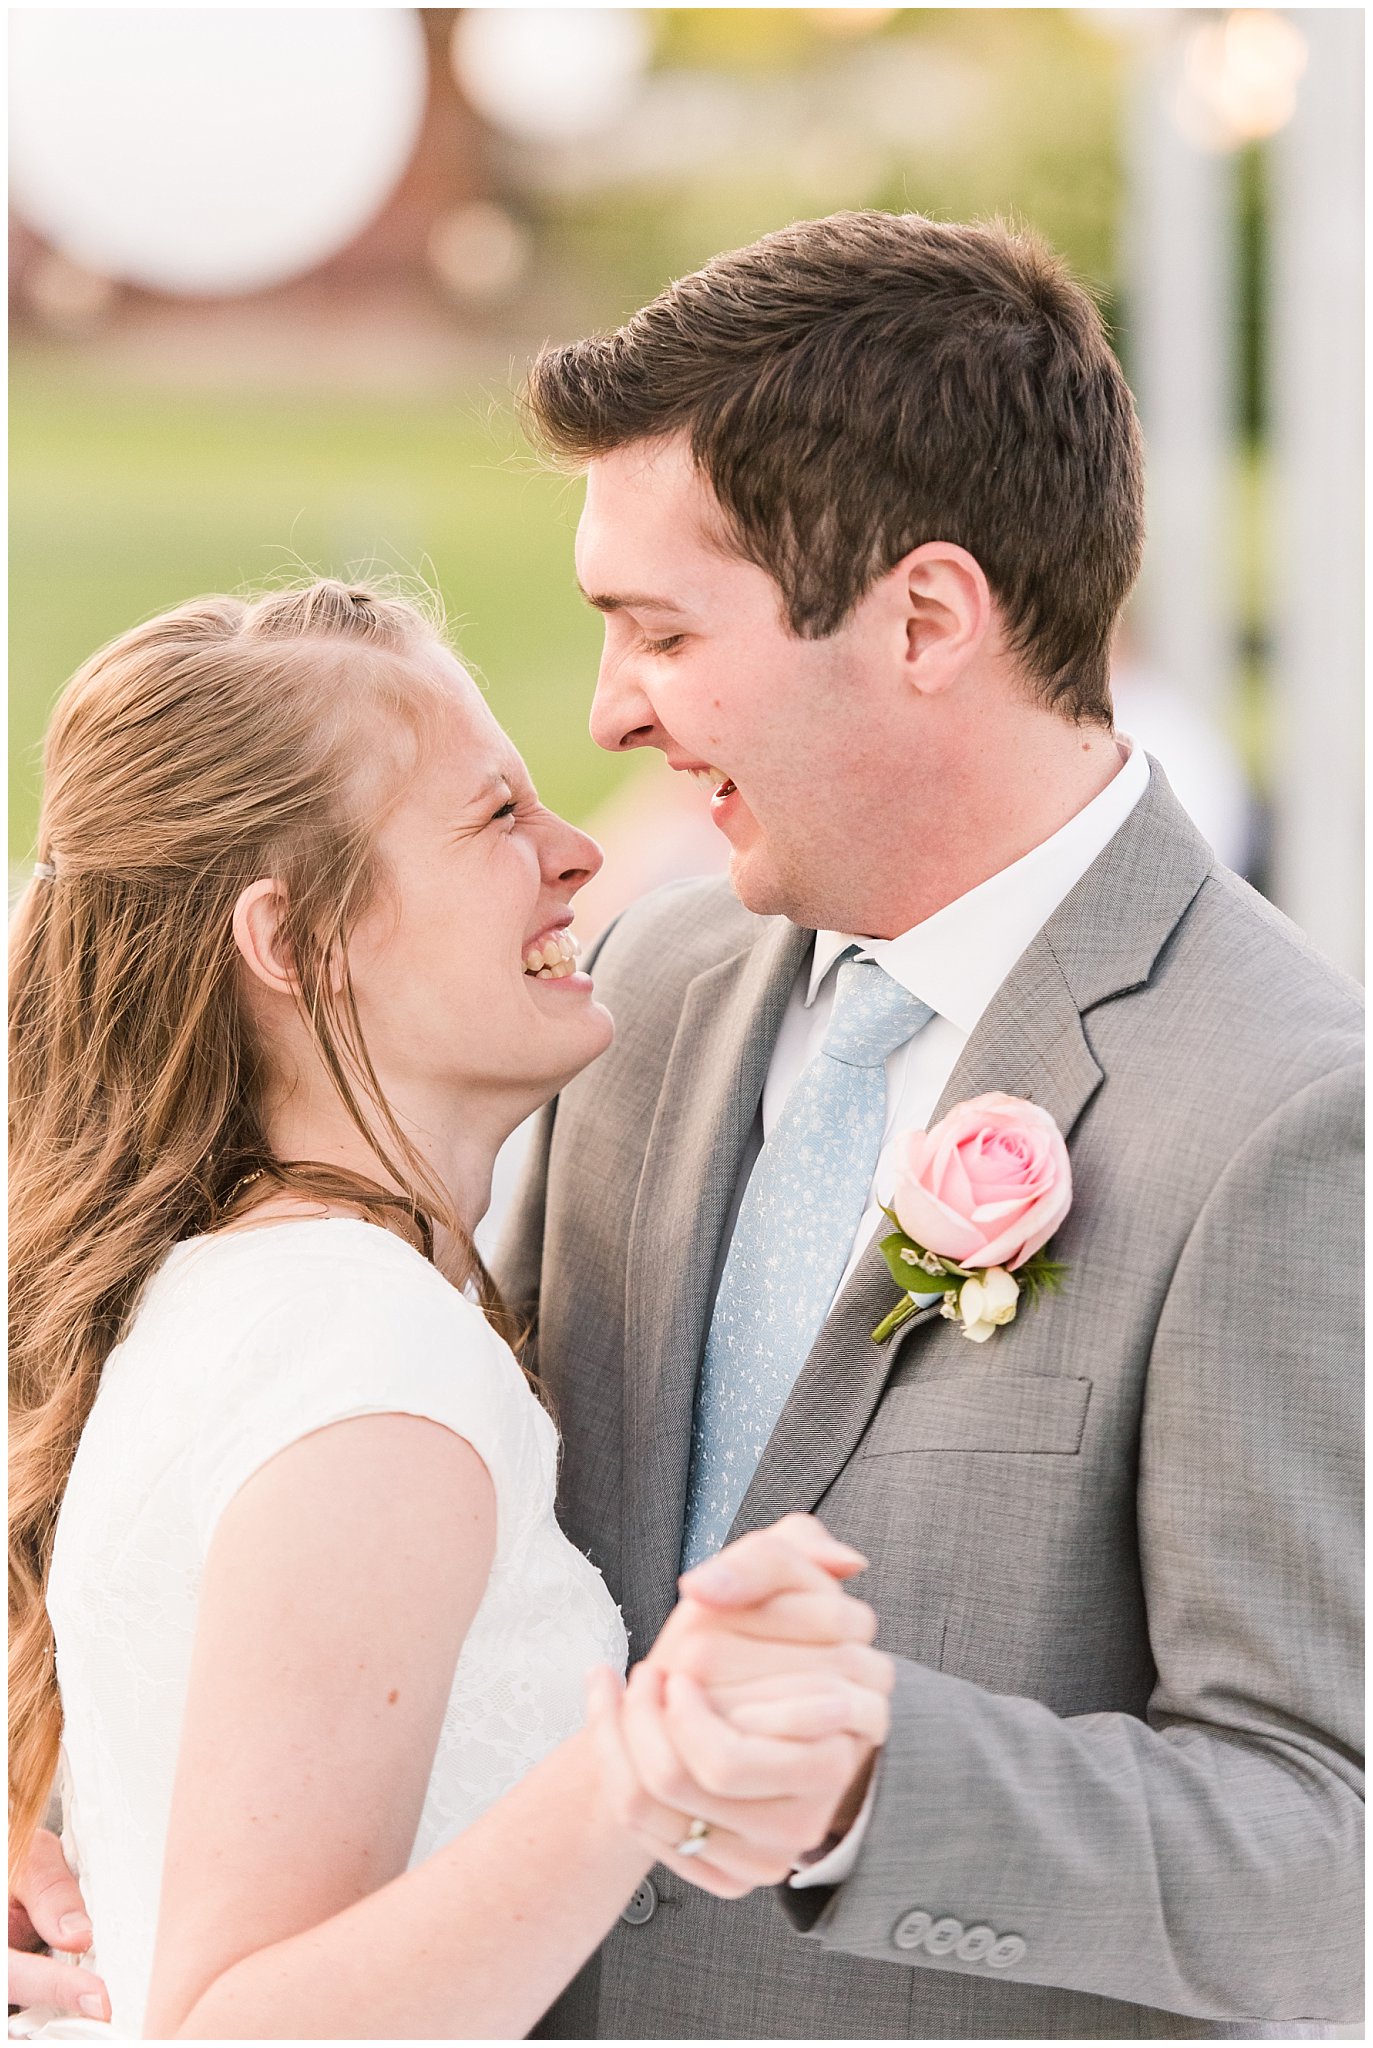 First dance candid moments | Backyard outdoor spring wedding with grey, blush, and light blue wedding colors | Spring Provo City Center Temple Wedding | Utah Wedding Photographers | Jessie and Dallin Photography